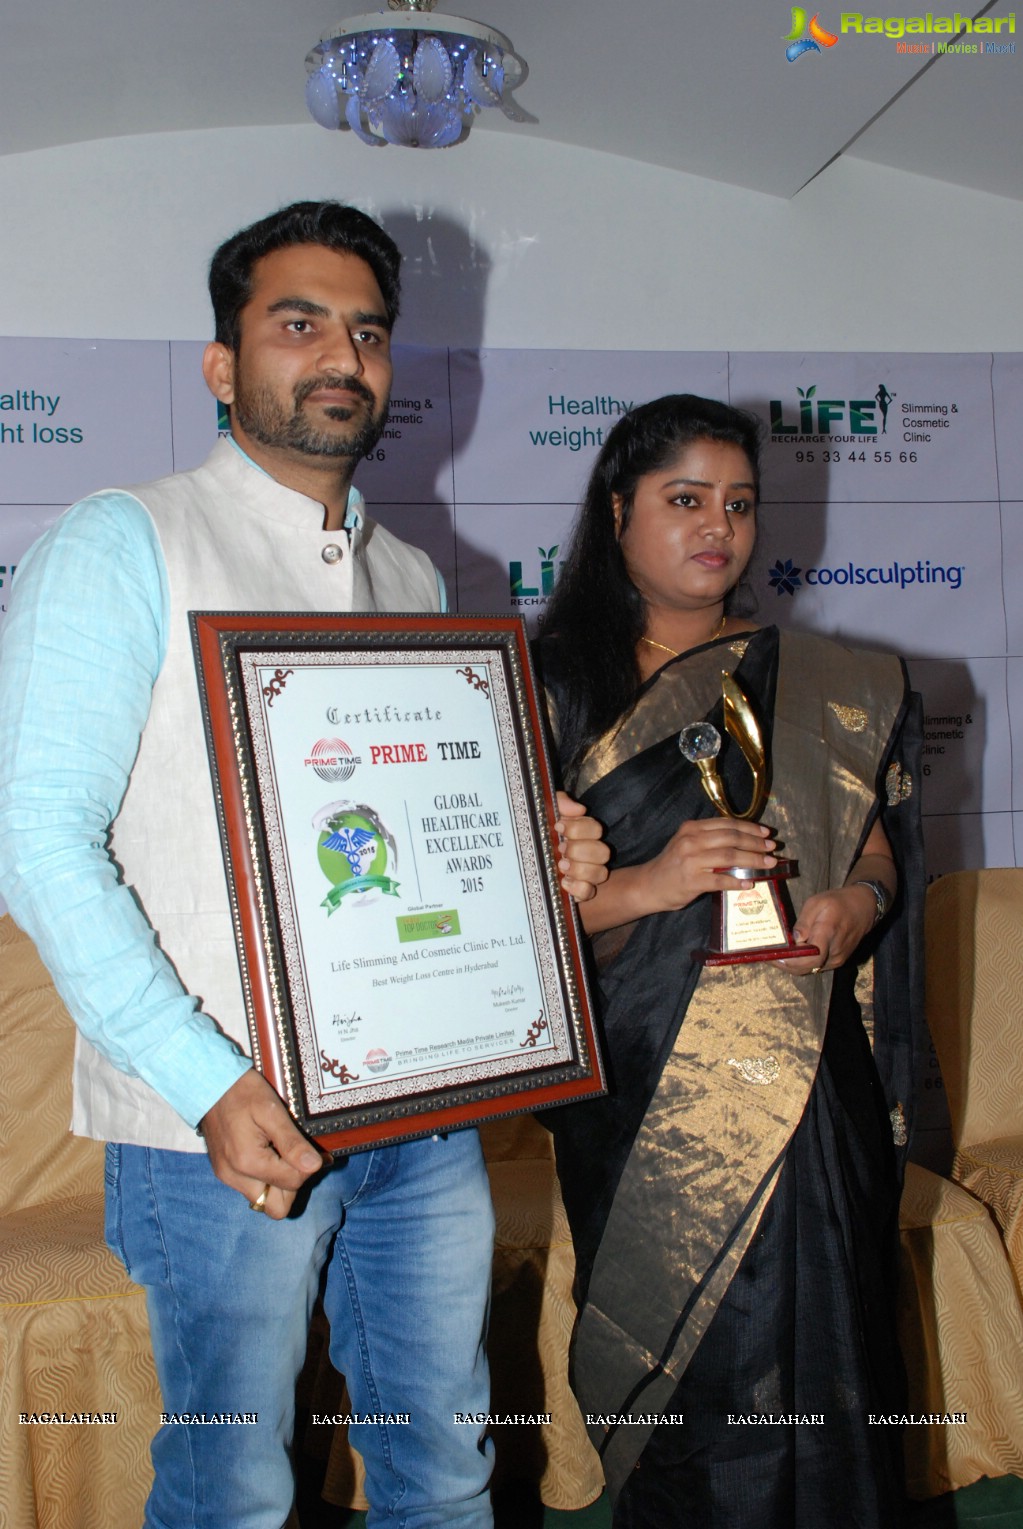 Life Slimming and Cosmetic Clinic Press Meet, Hyderabad